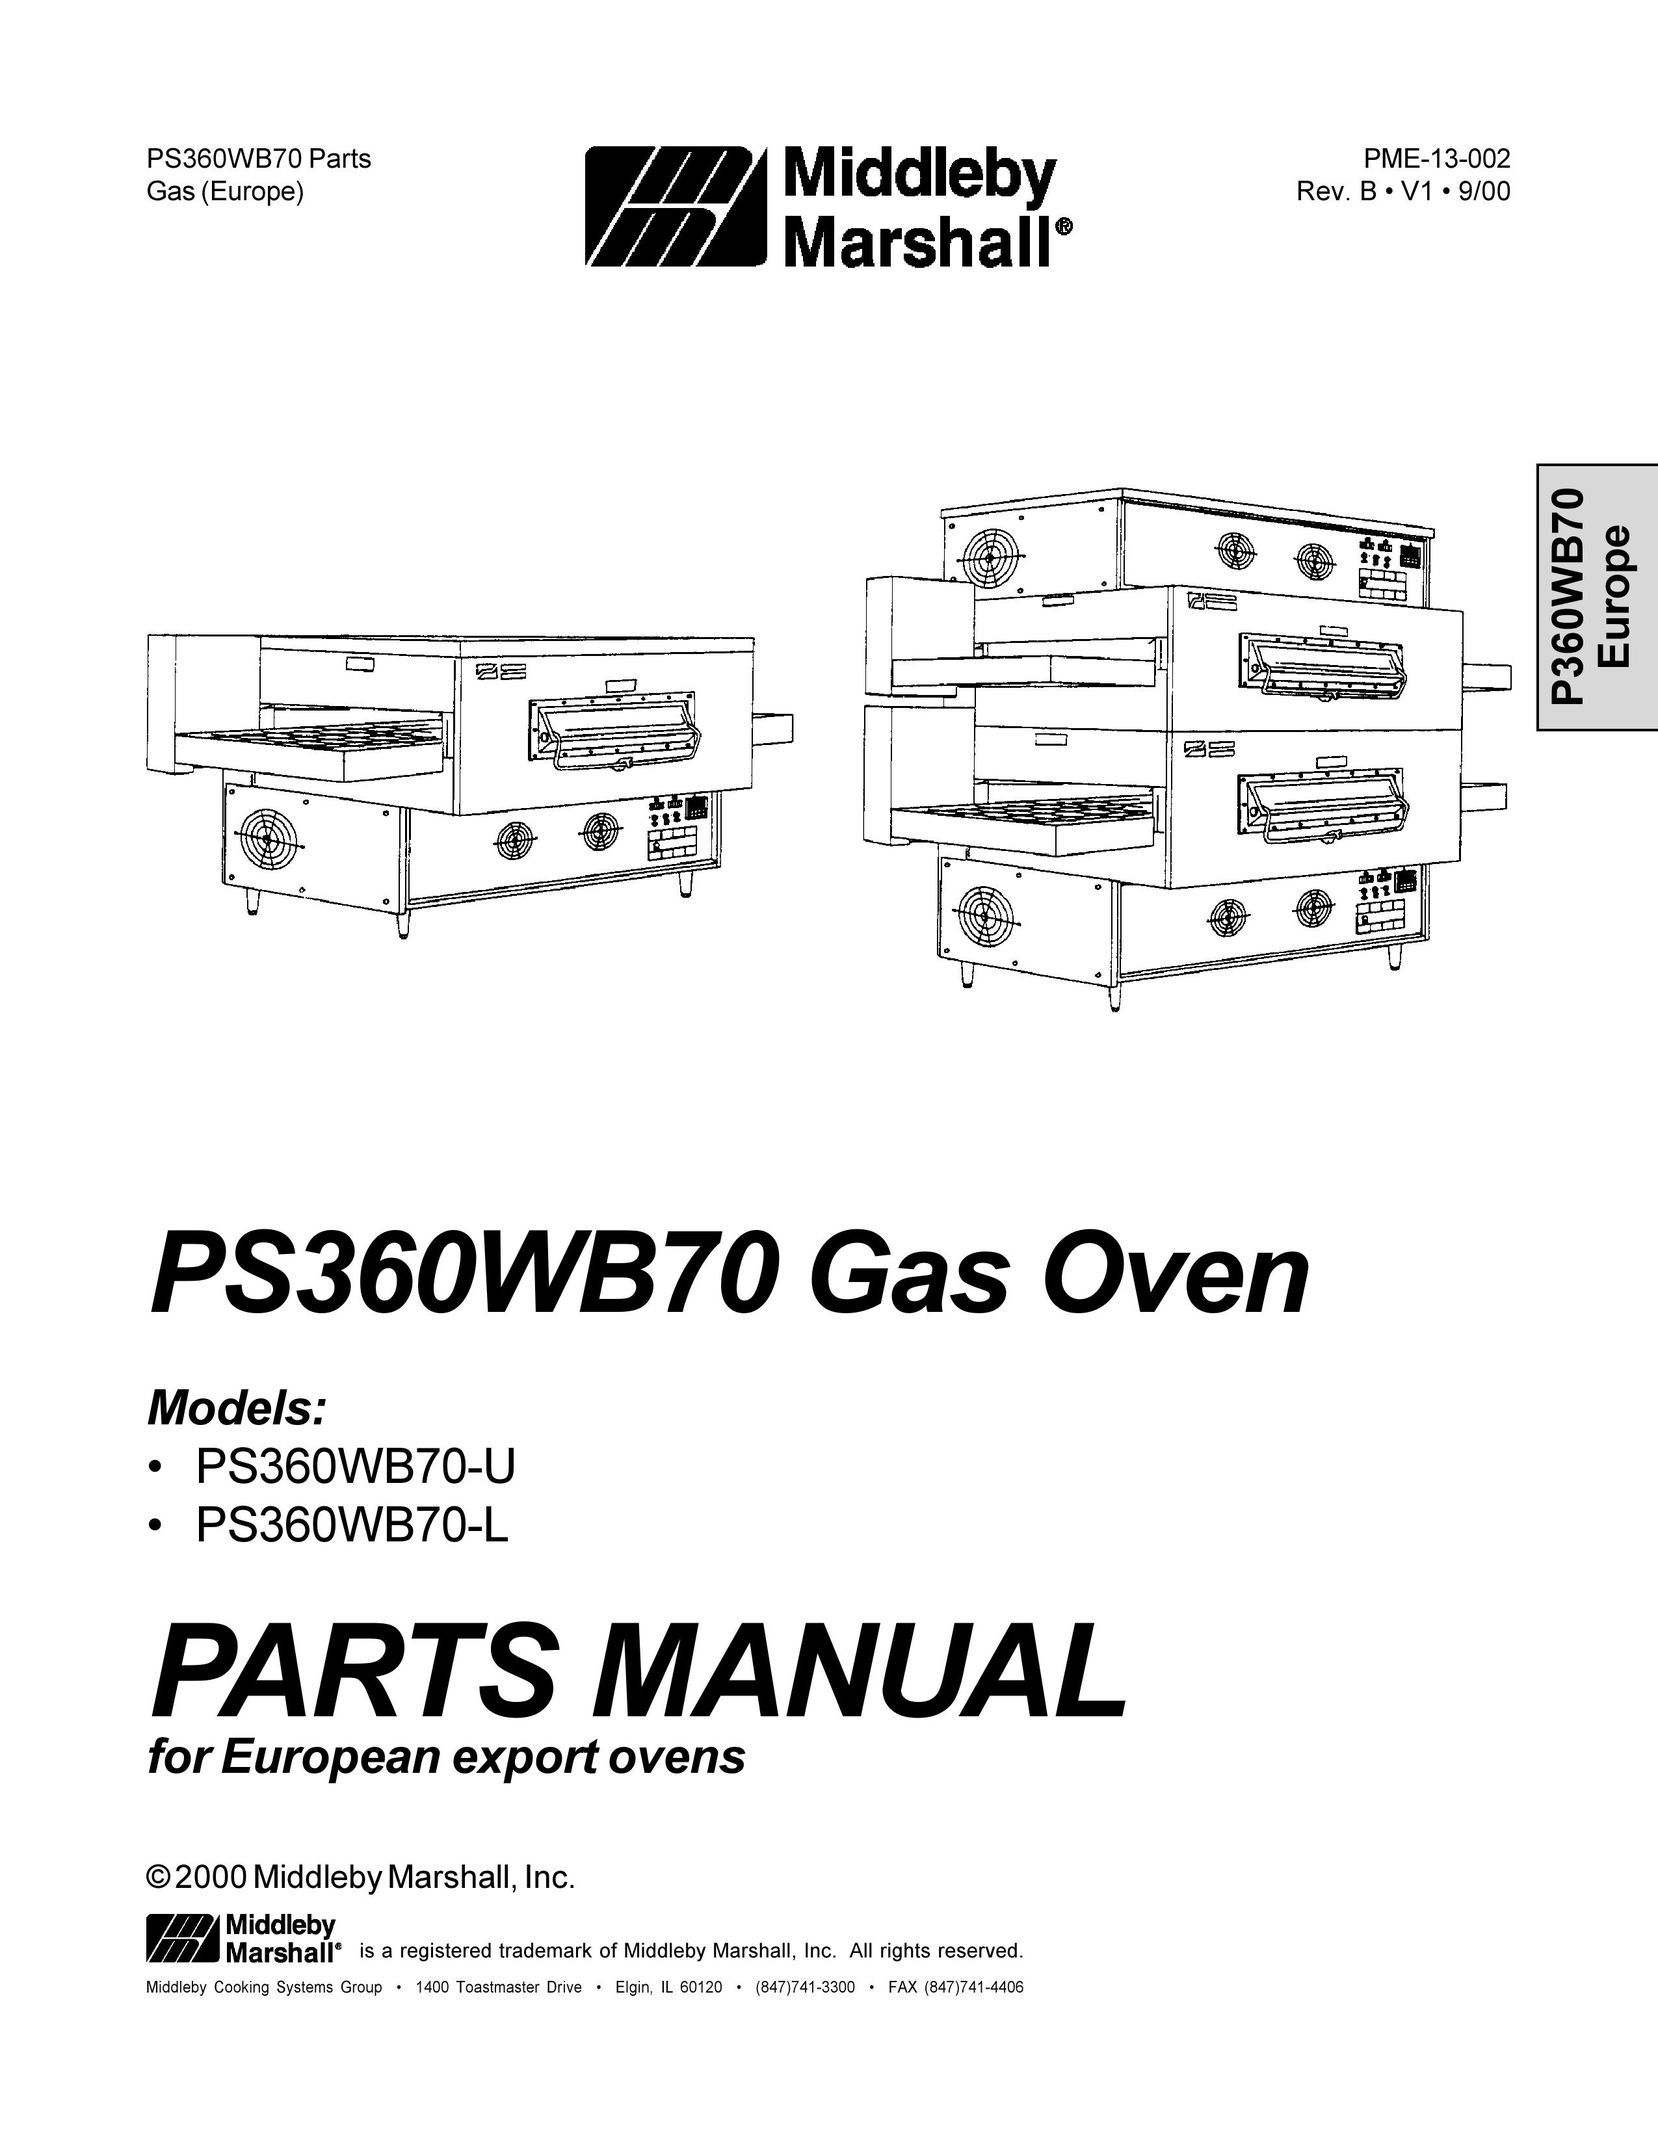 Middleby Cooking Systems Group PS360WB70-U Oven User Manual